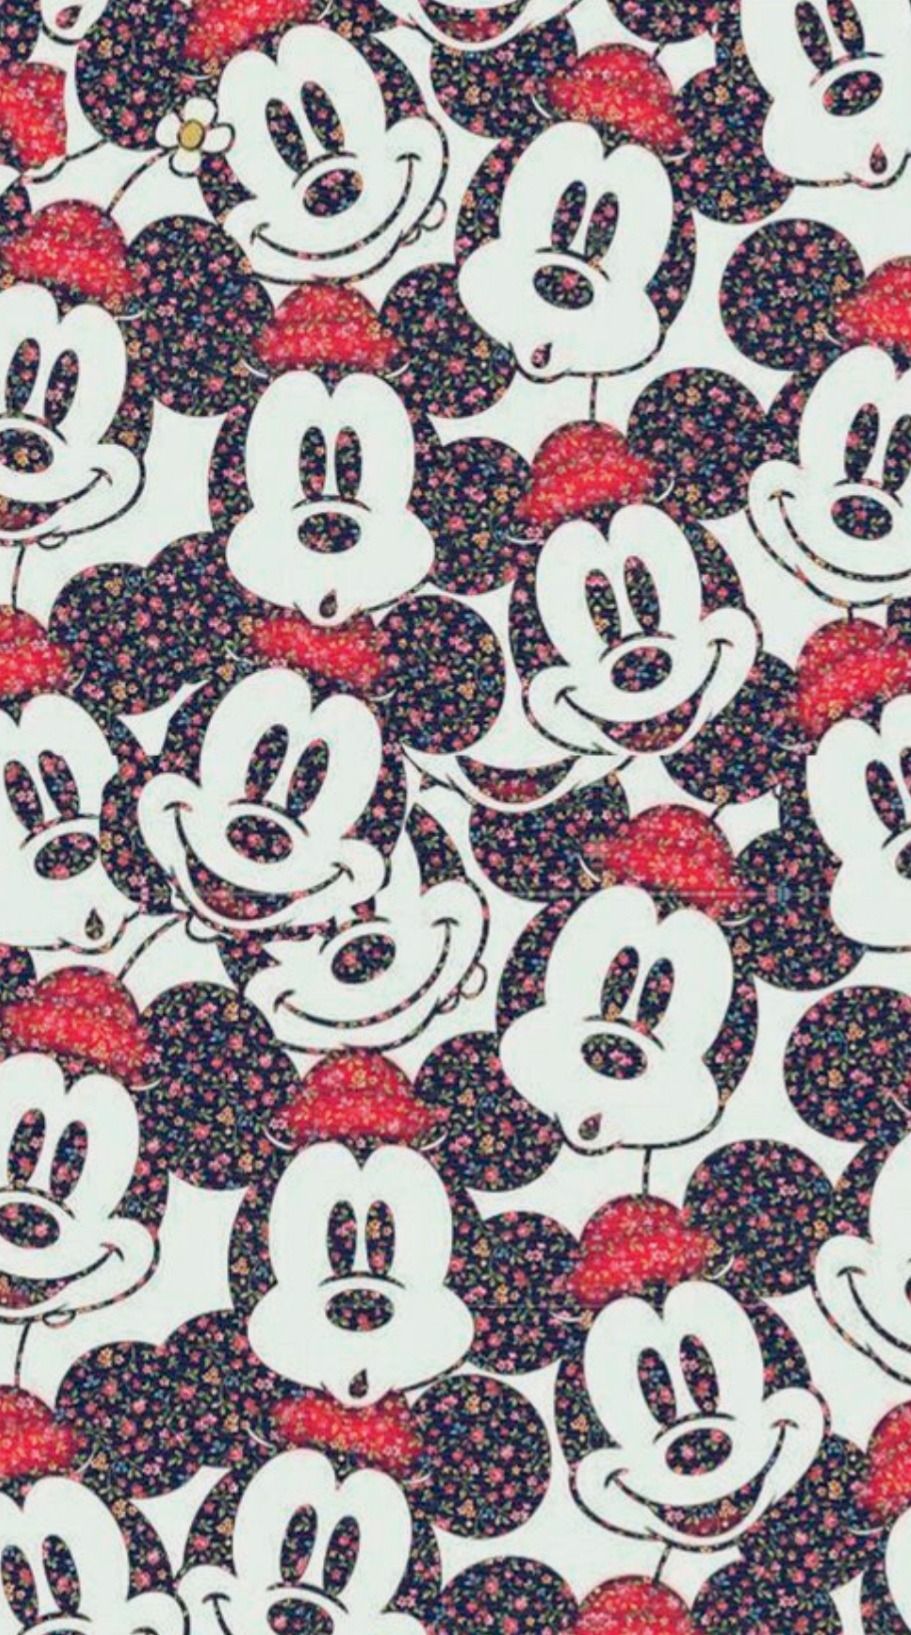 A close up of the fabric with mickey mouse heads - Mickey Mouse